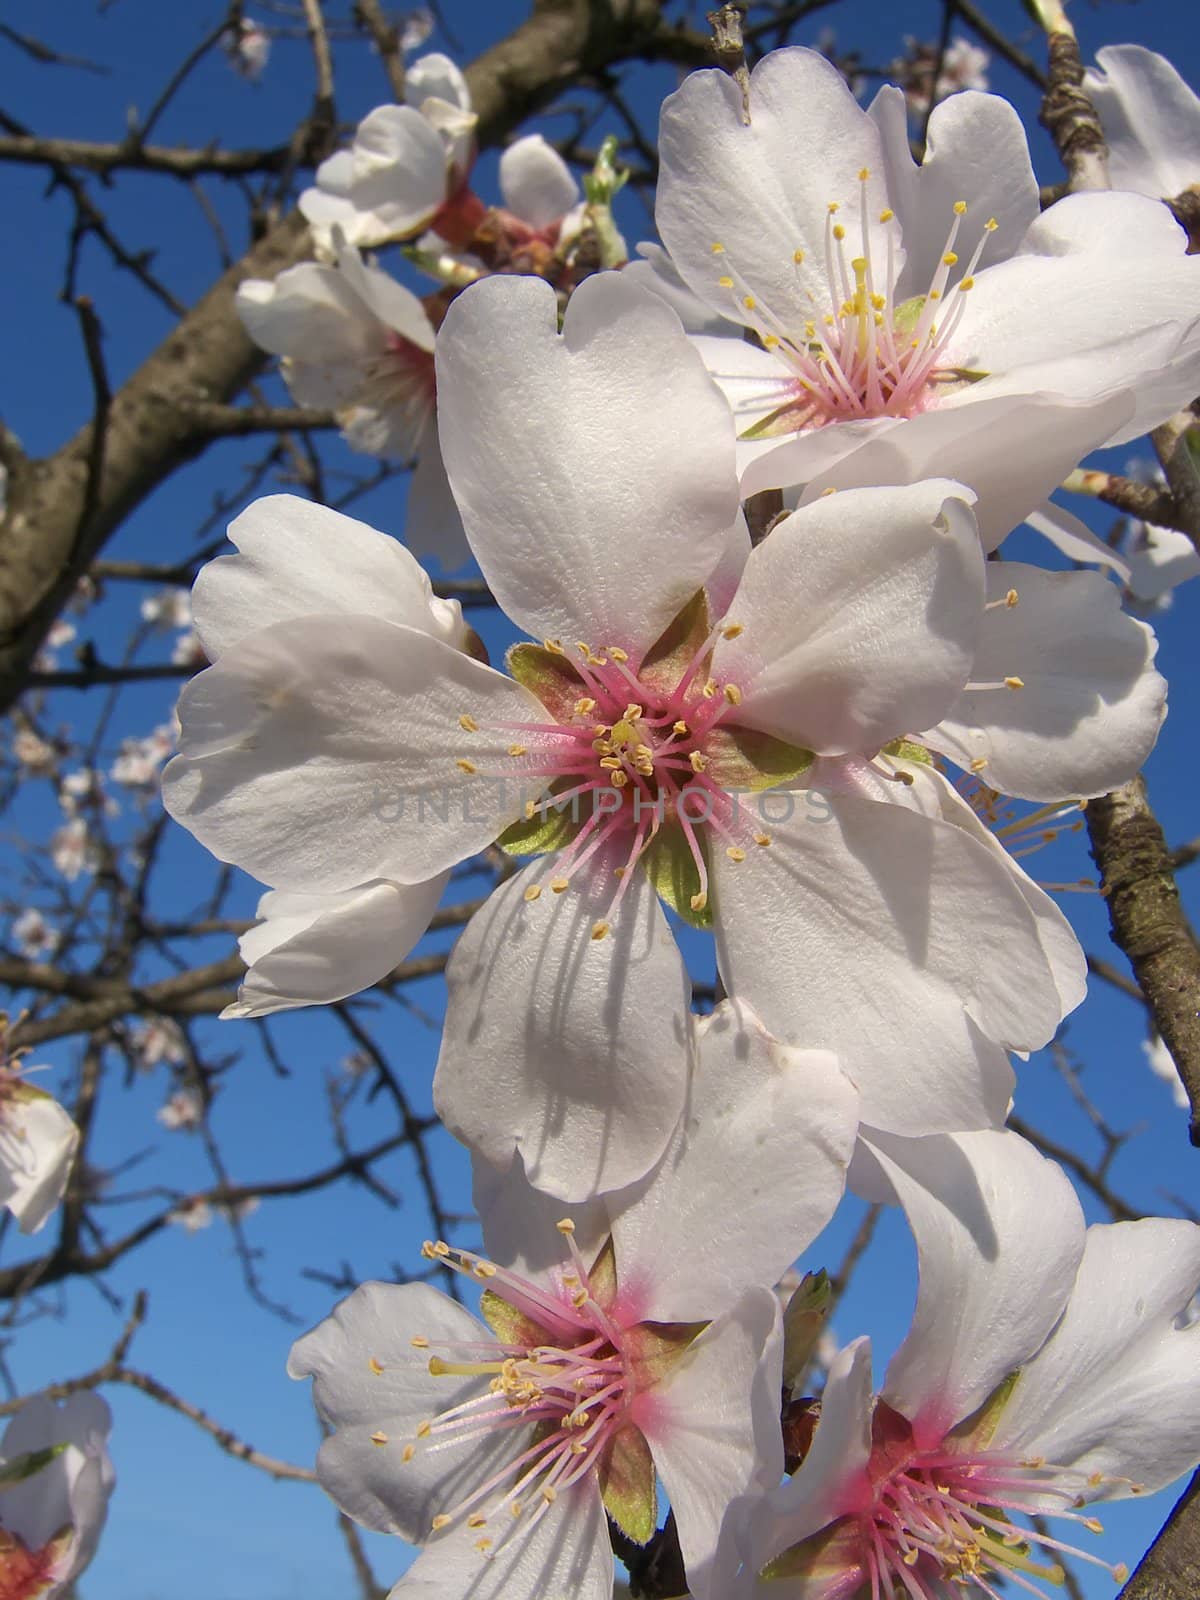 image of some flowers on almond tree branches